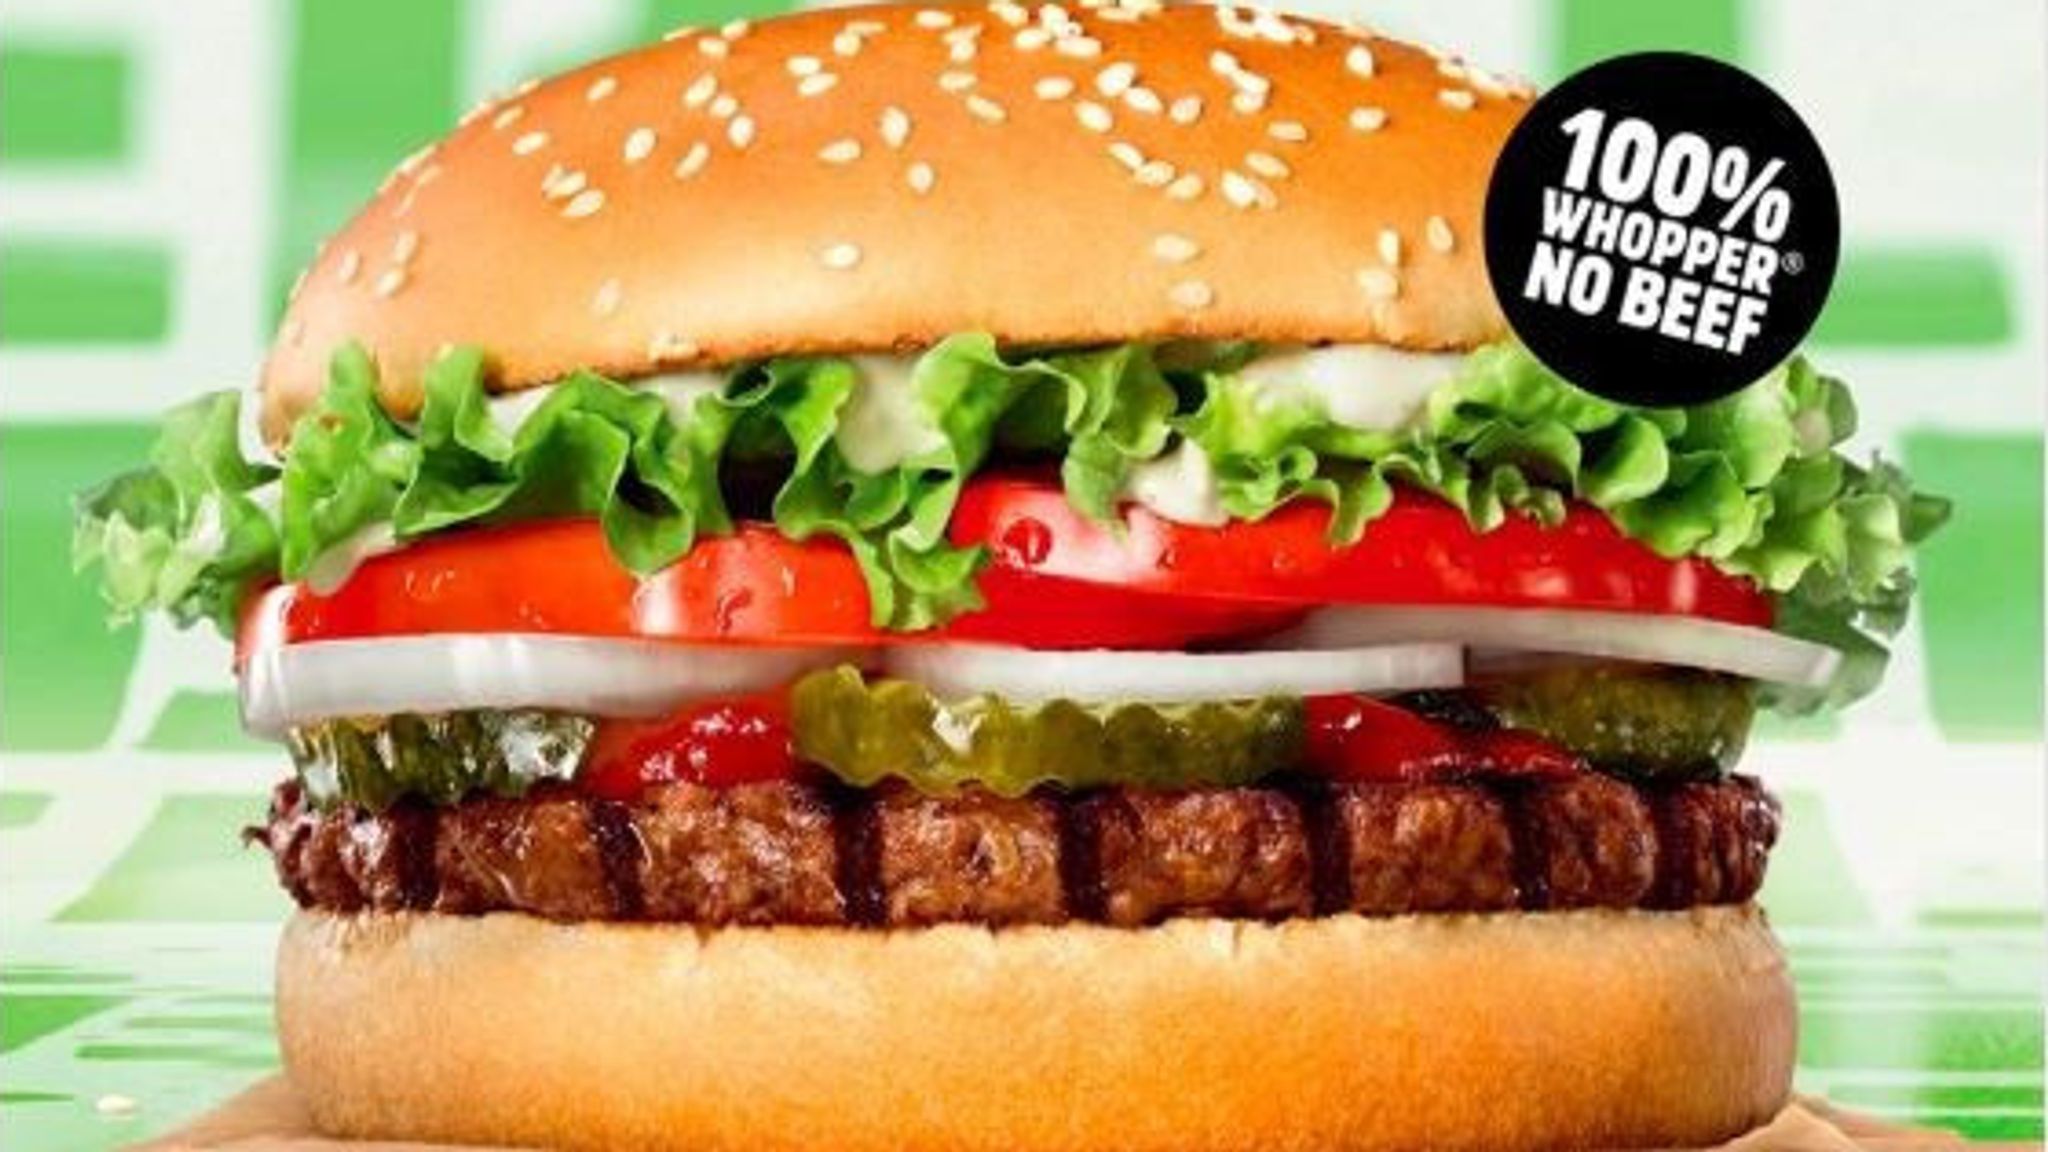 Burger King Said The Rebel Whopper Was & - New Burger King Advertisements , HD Wallpaper & Backgrounds